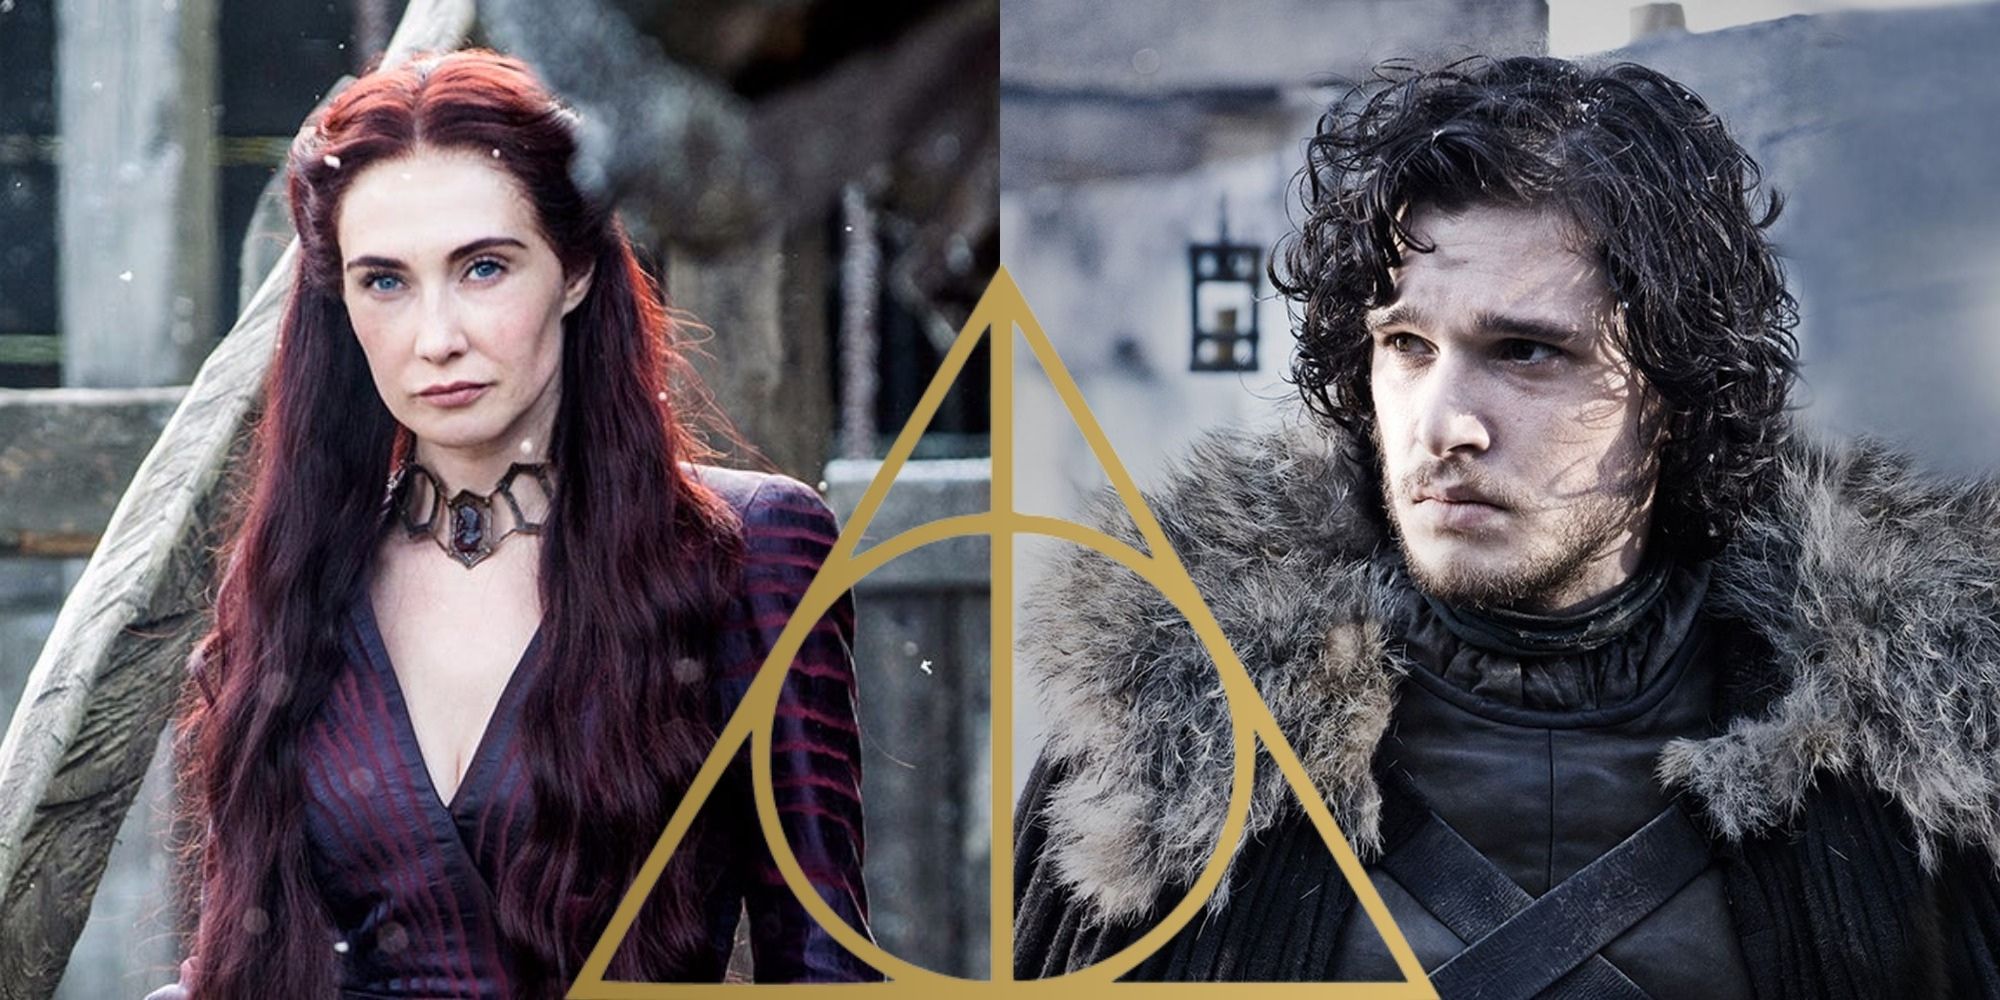 Split image showing Melisandre and Jon in GOT, and the Deathly Hallows symbol from HP